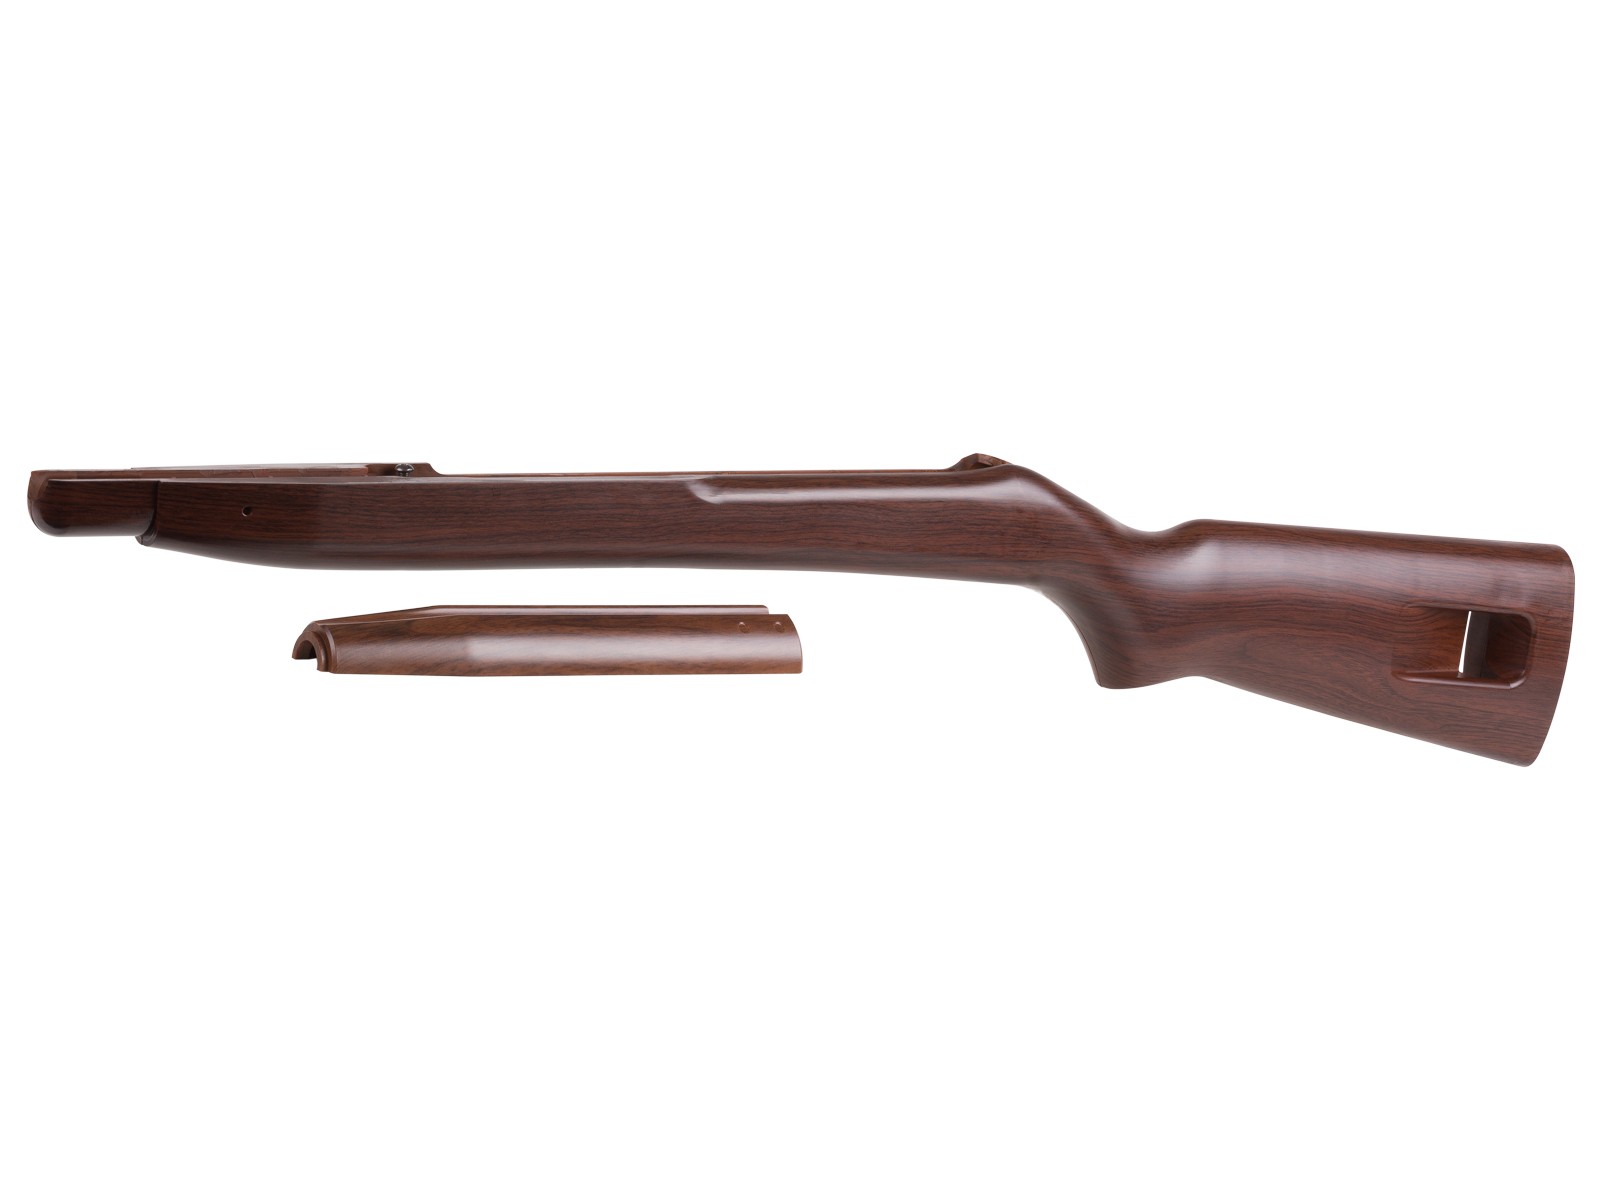 M1 Carbine Synthetic Stock (fits both .177 and 6mm bb rifles)